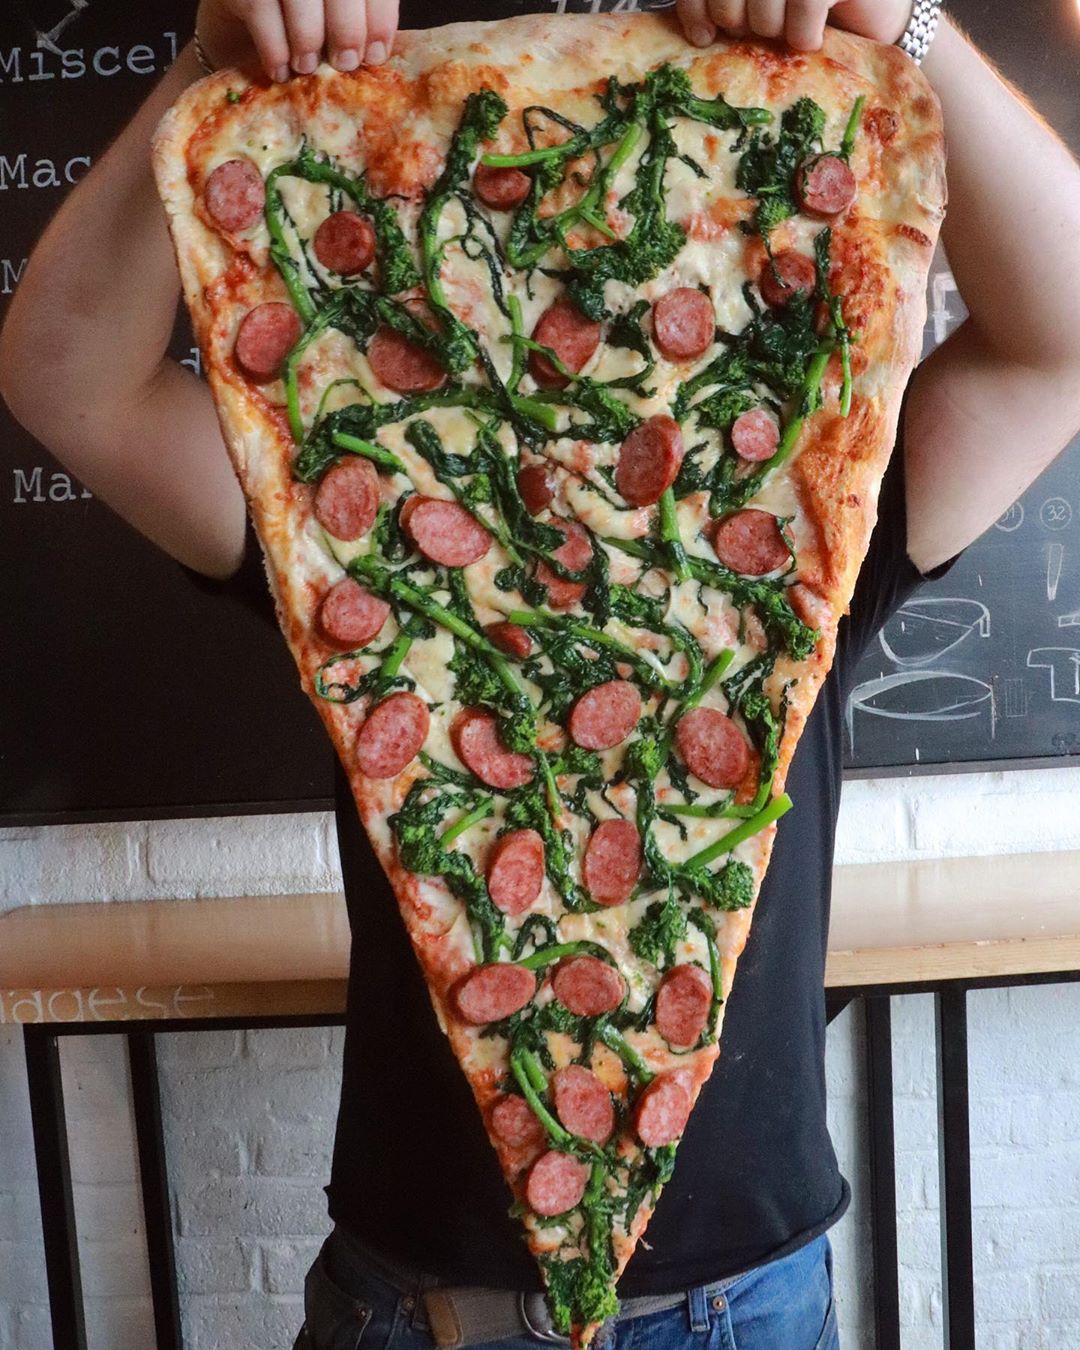 La Manna in Toronto | New Foodie Trend Is A Giant Pizza Slice – The Biggest You've Seen | Her Beauty